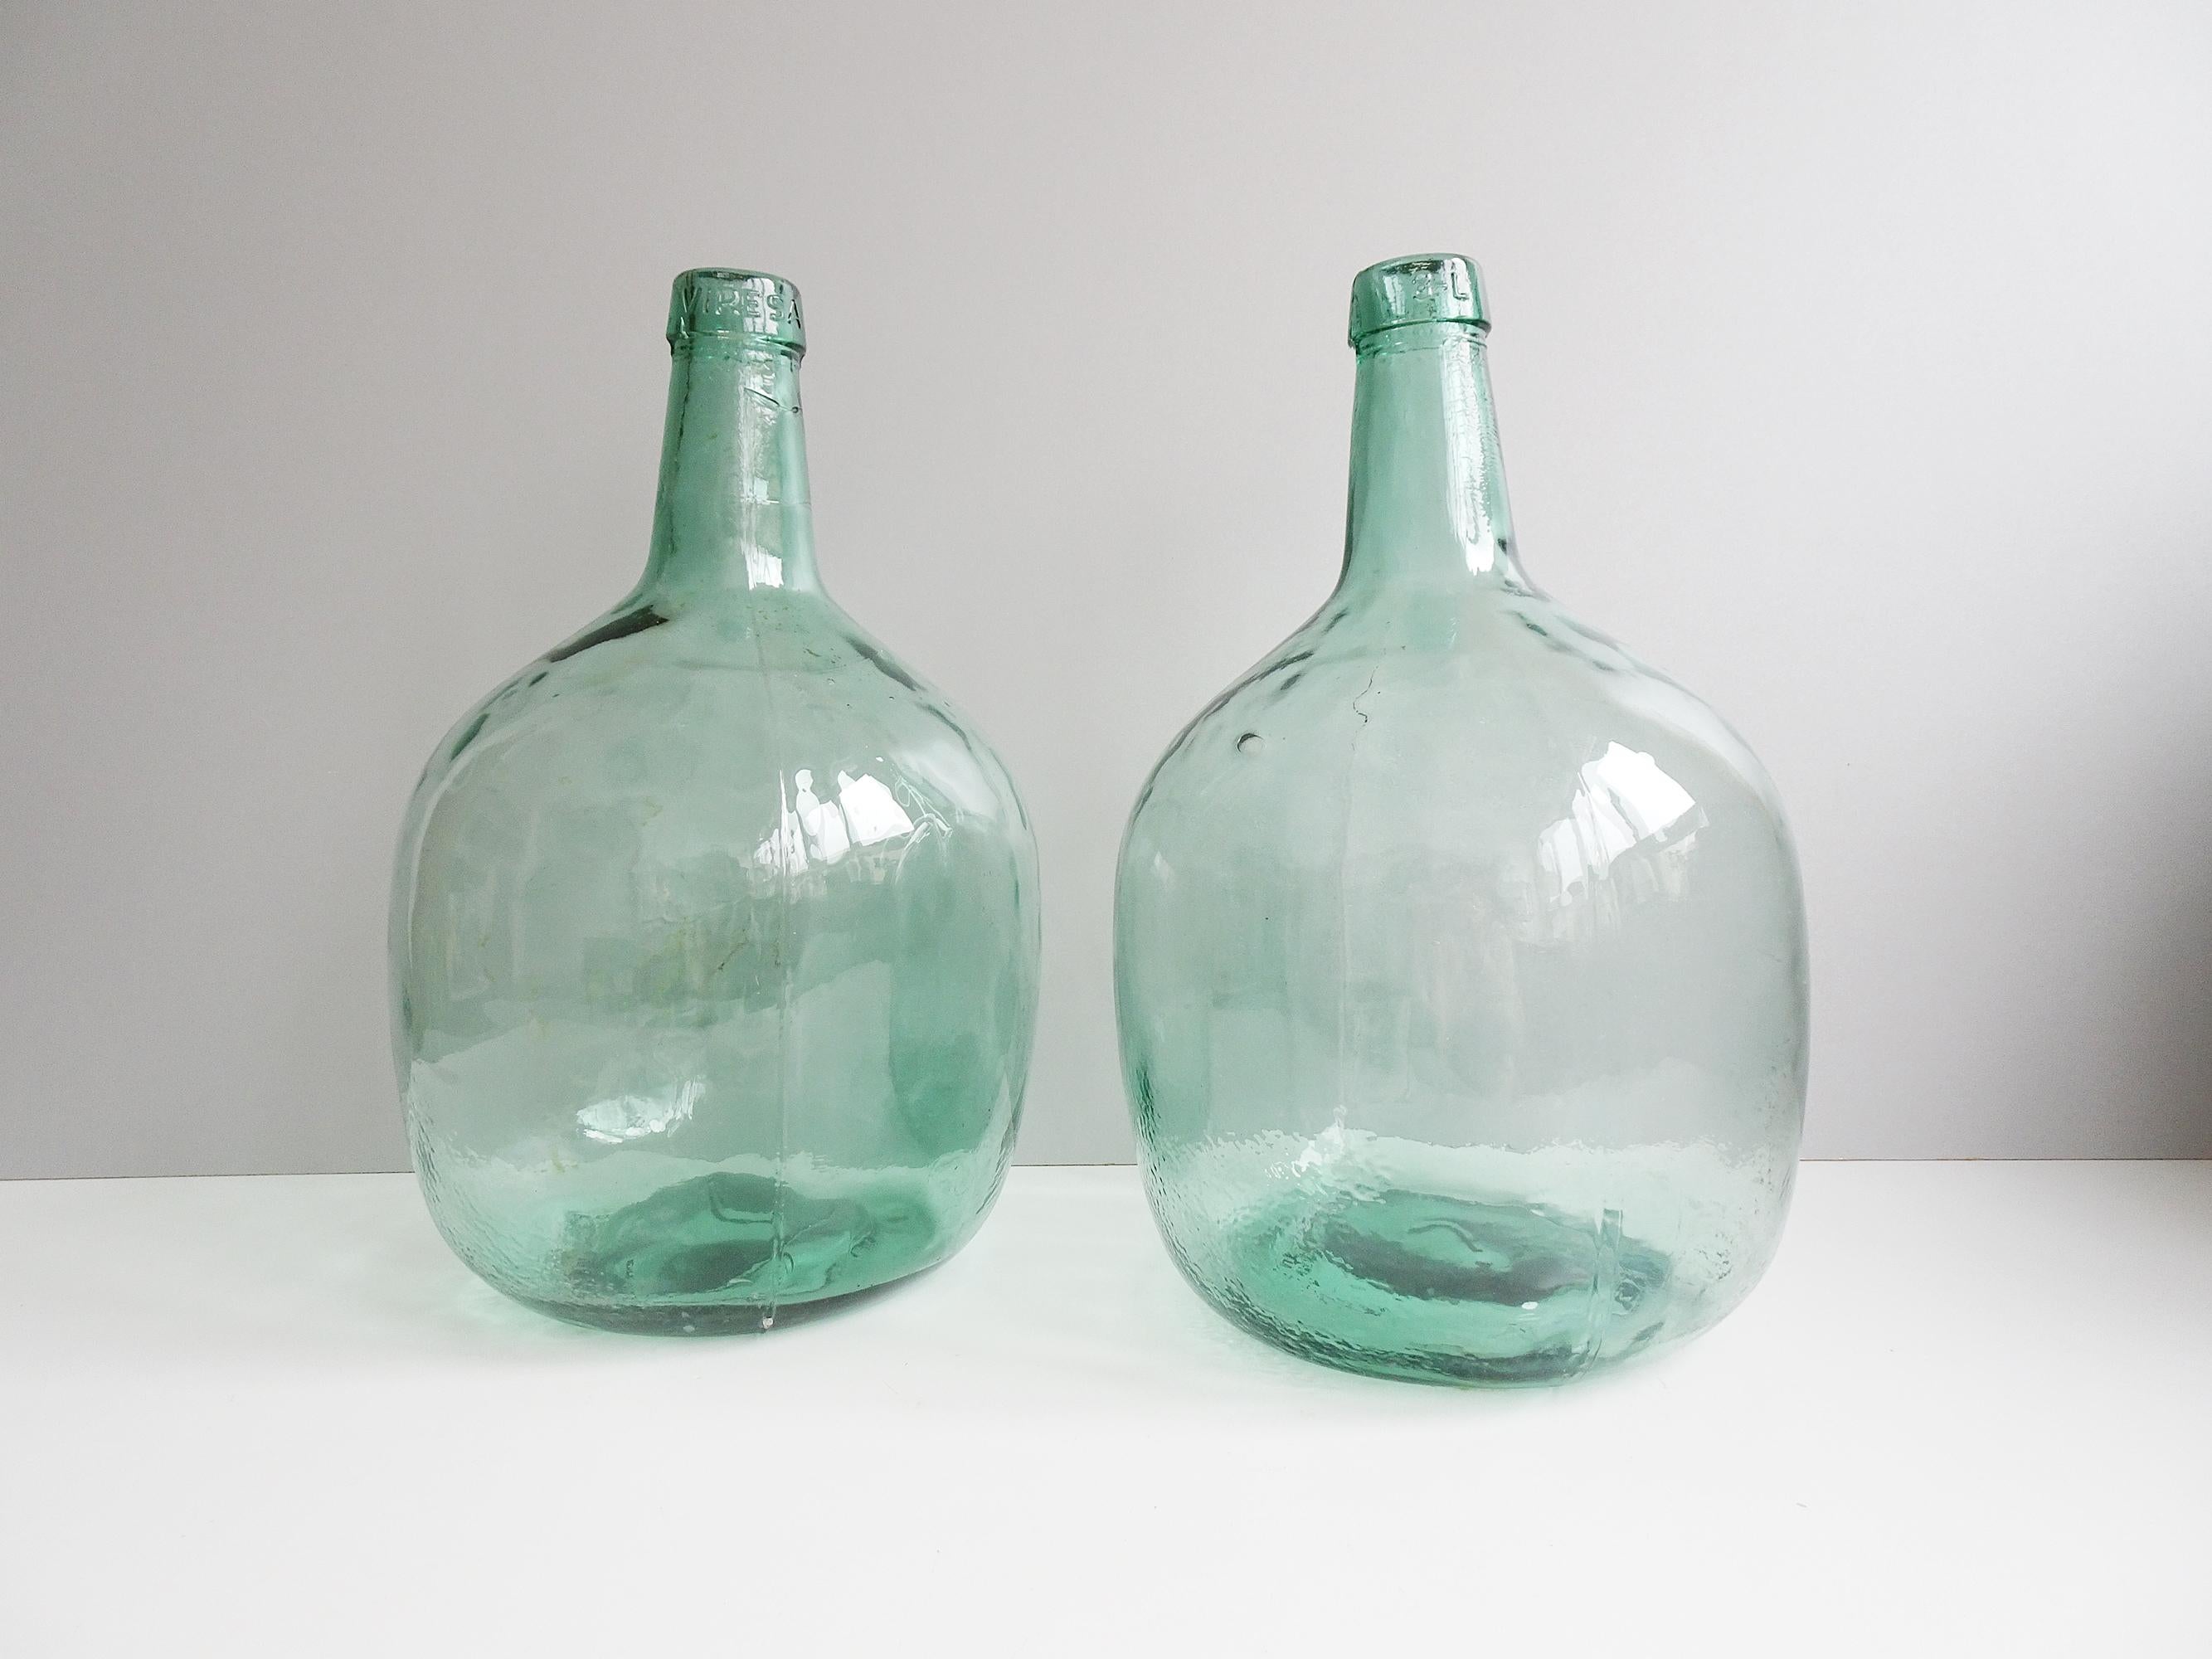 Two old Viresa glass bottles with a capacity of eight liters. The glass balloons have a refreshingly light green color with slight air pockets. Both demijohns are not perfect in shape, which gives them a great vintage character.